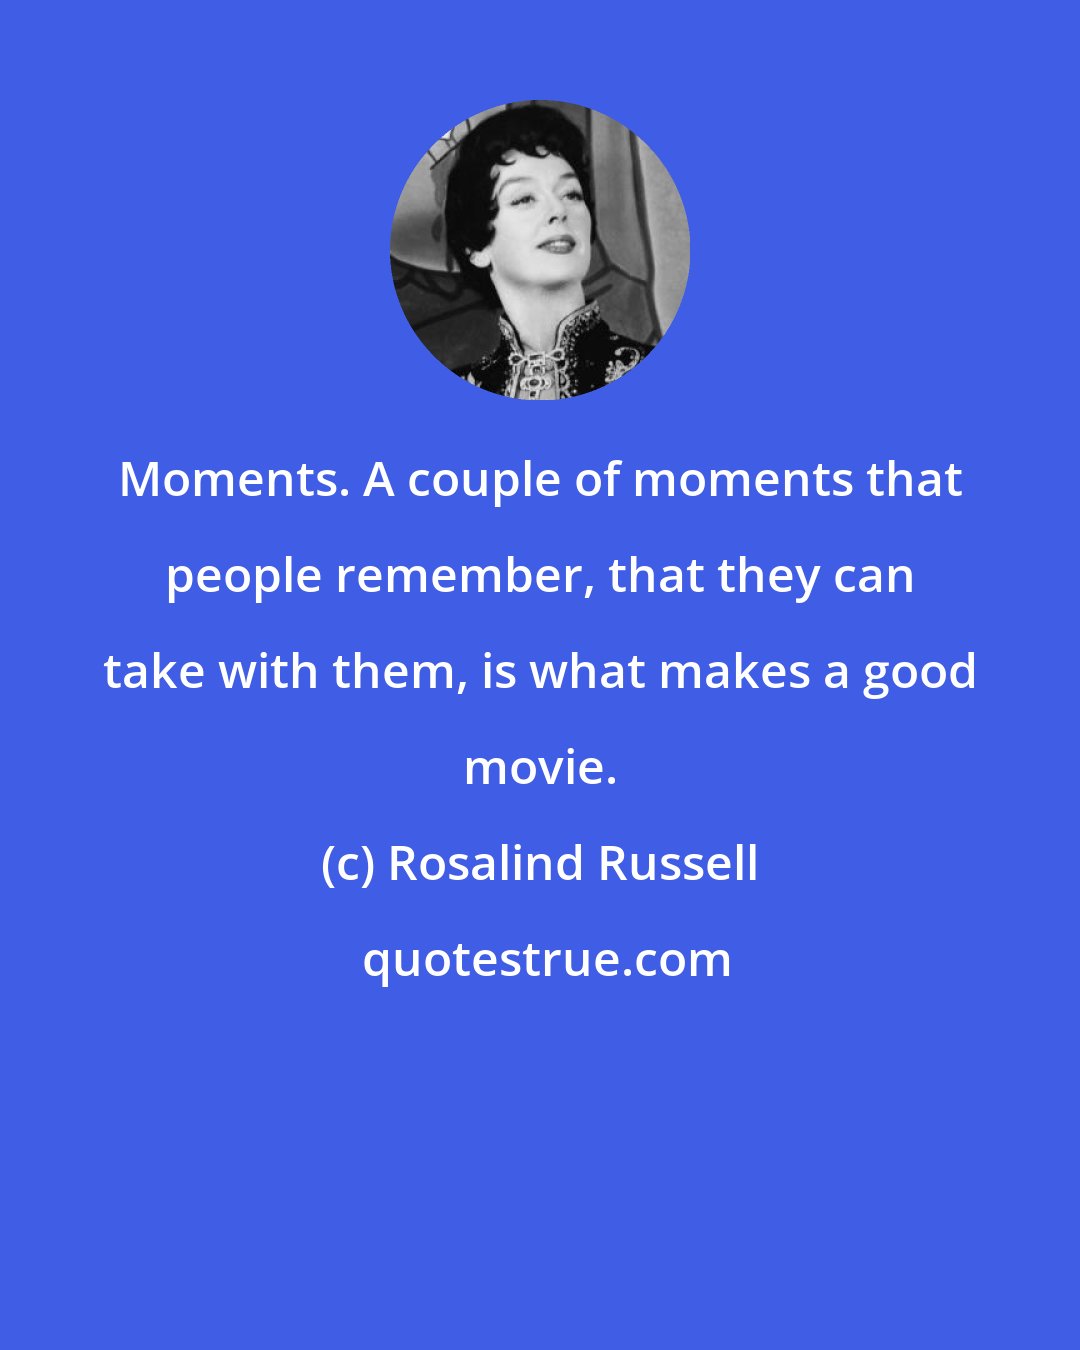 Rosalind Russell: Moments. A couple of moments that people remember, that they can take with them, is what makes a good movie.